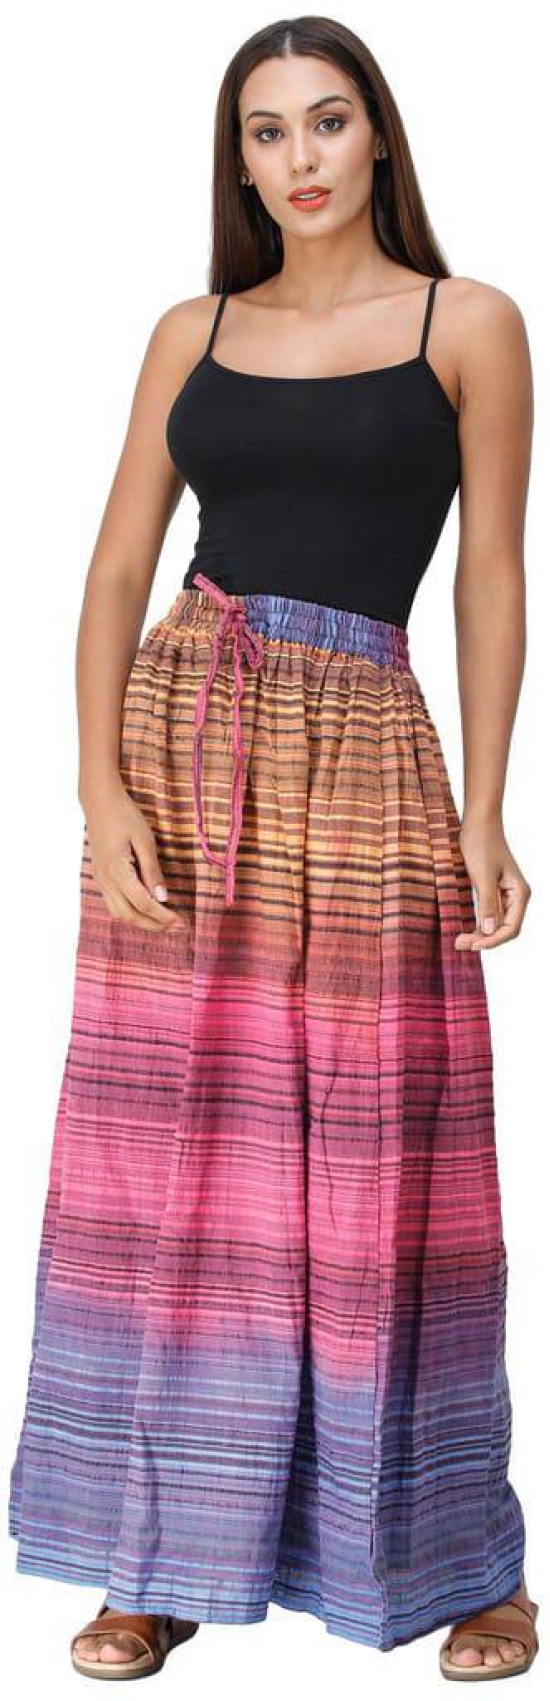 Wild-Orchid Long Summer Skirt with Stripes Woven in Multi-Color Thread and Dori on Waist